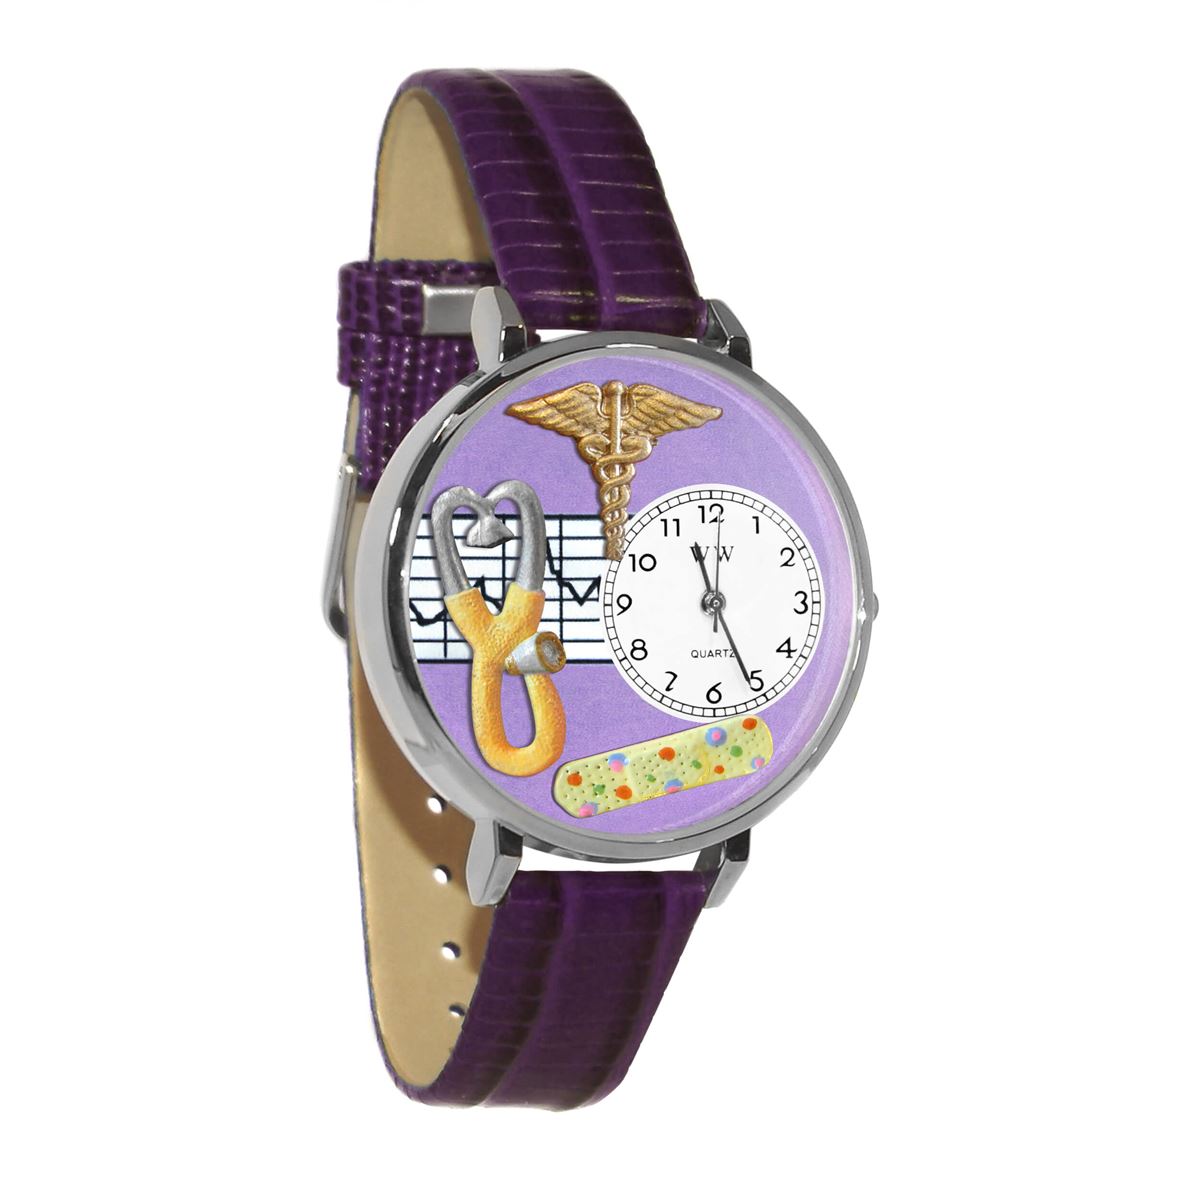 Whimsical Gifts | Nurse Stethoscope Purple 3D Watch Large Style | Handmade in USA | Professions Themed | Nurse | Novelty Unique Fun Miniatures Gift | Silver Finish Purple Leather Watch Band